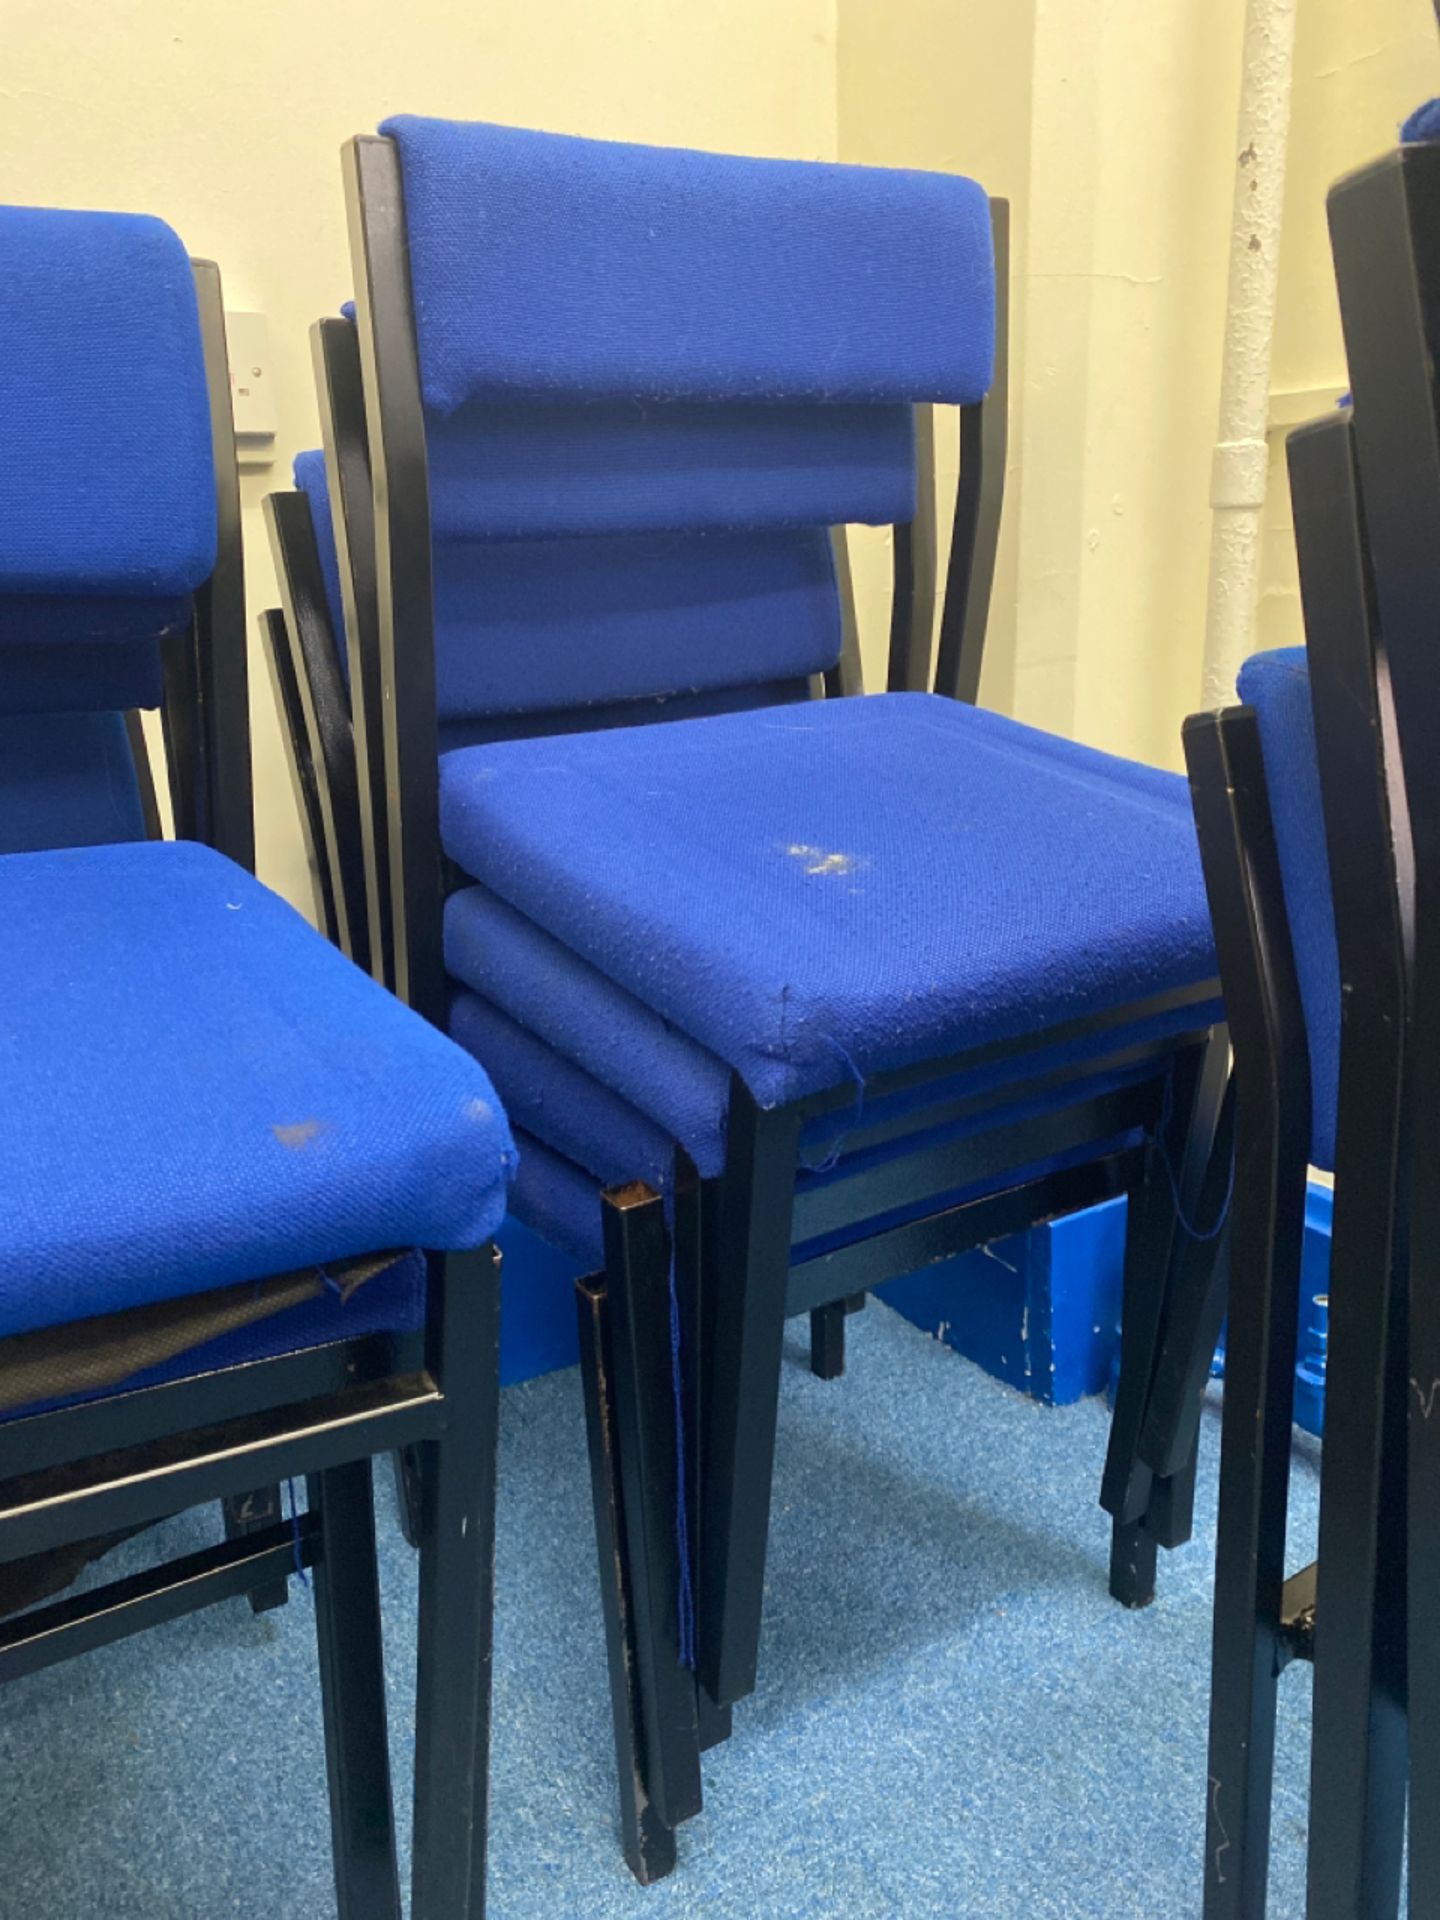 Set of 4 Cusioned Classroom Chairs - Image 12 of 12